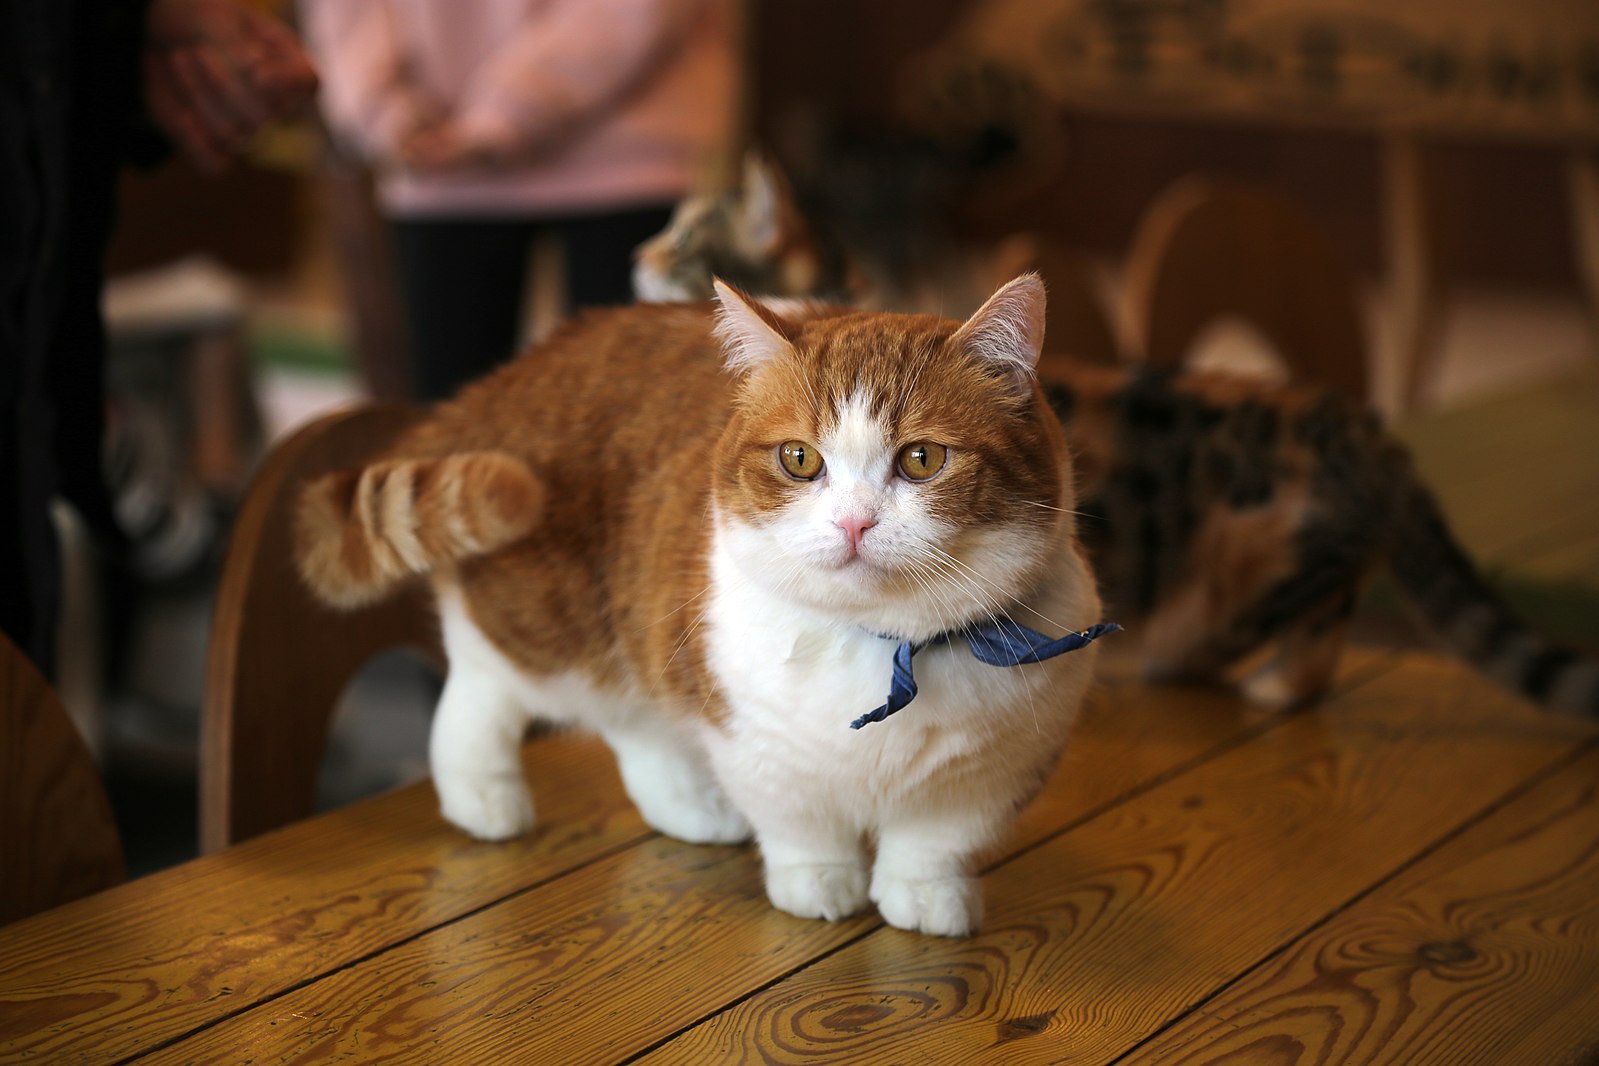 Munchkin cat walking on the table